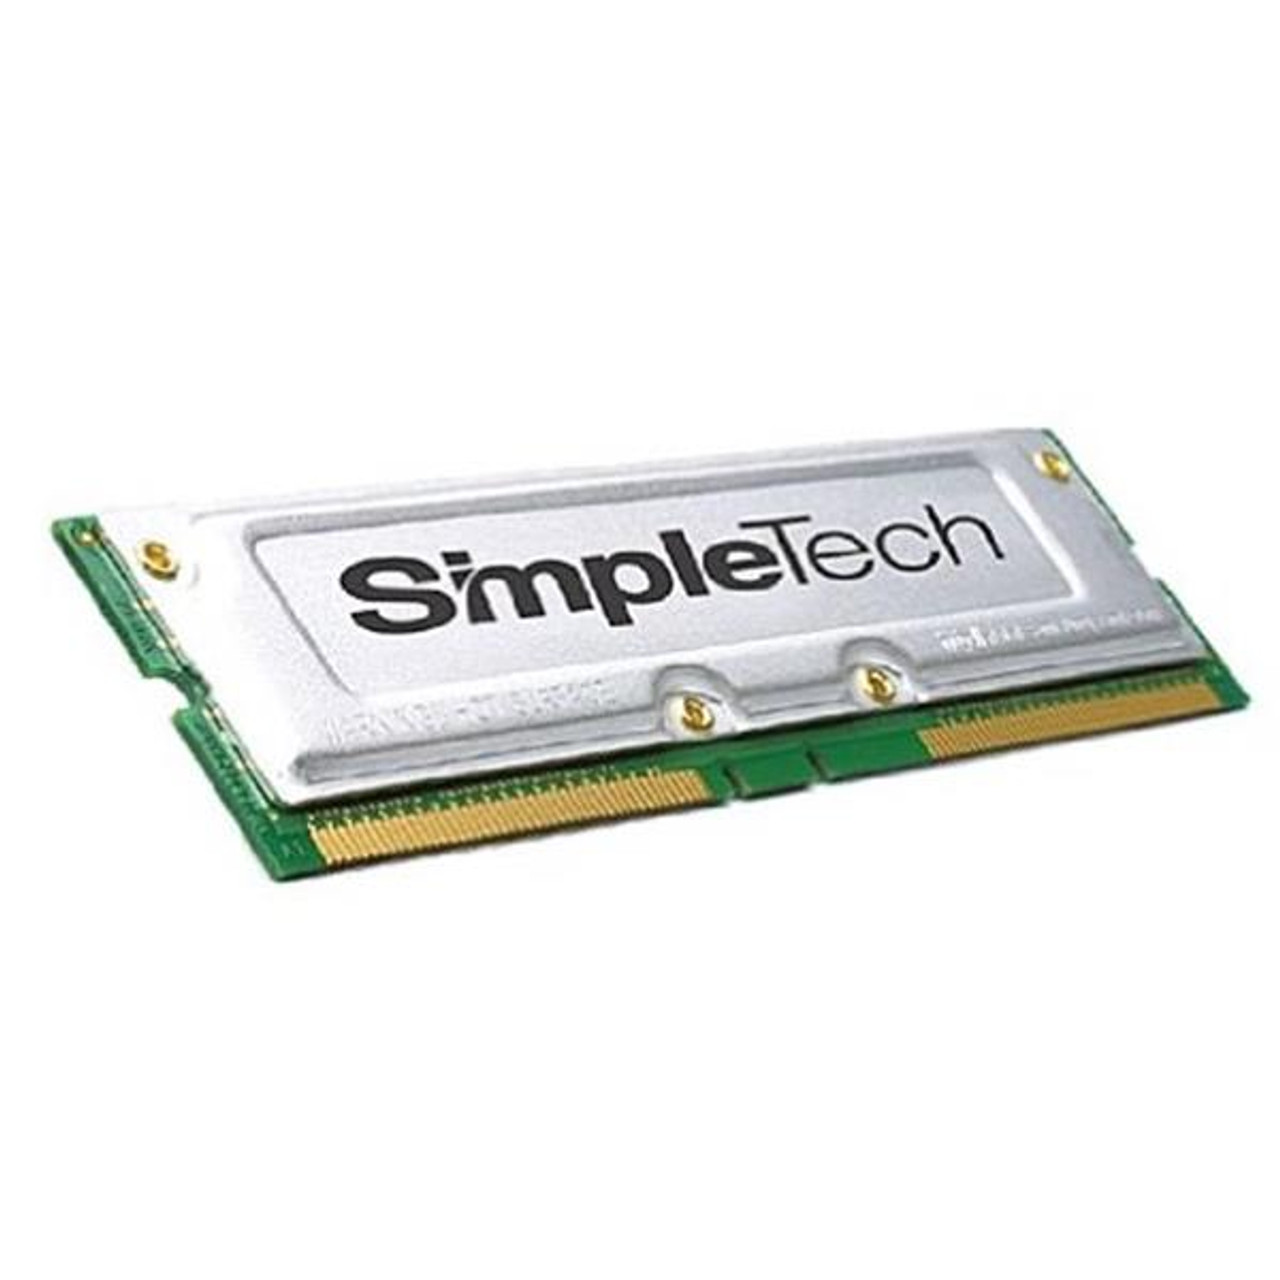 STS256/SPARC SimpleTech 256MB Module For Sun SPArcServer 630Mp 670Mp 690Mp